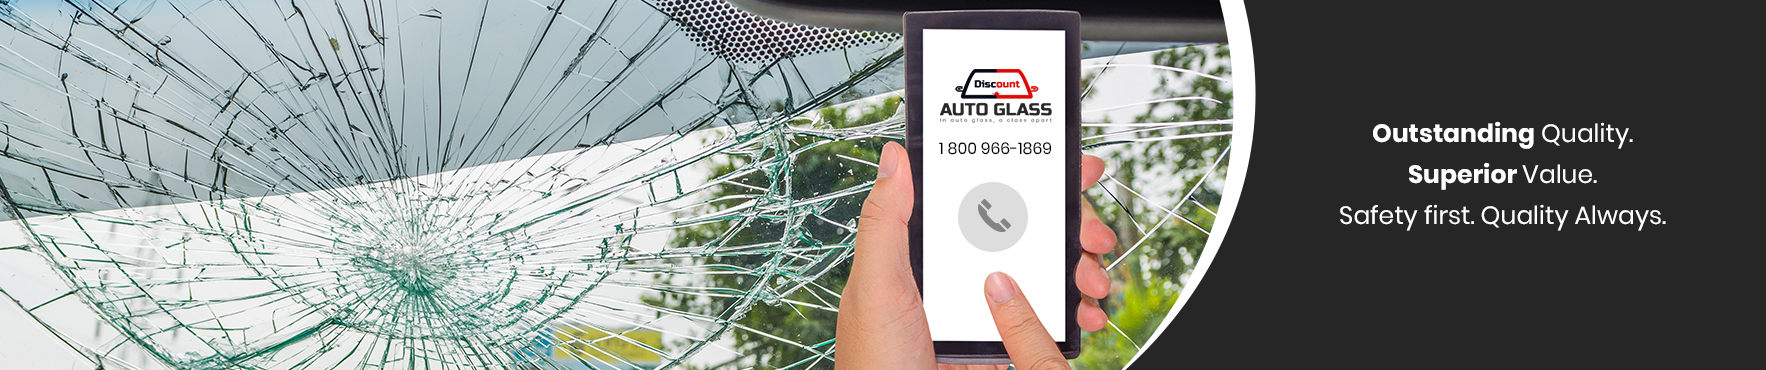 auto-glass-insurance-claims-outstanding-quality-superior-value